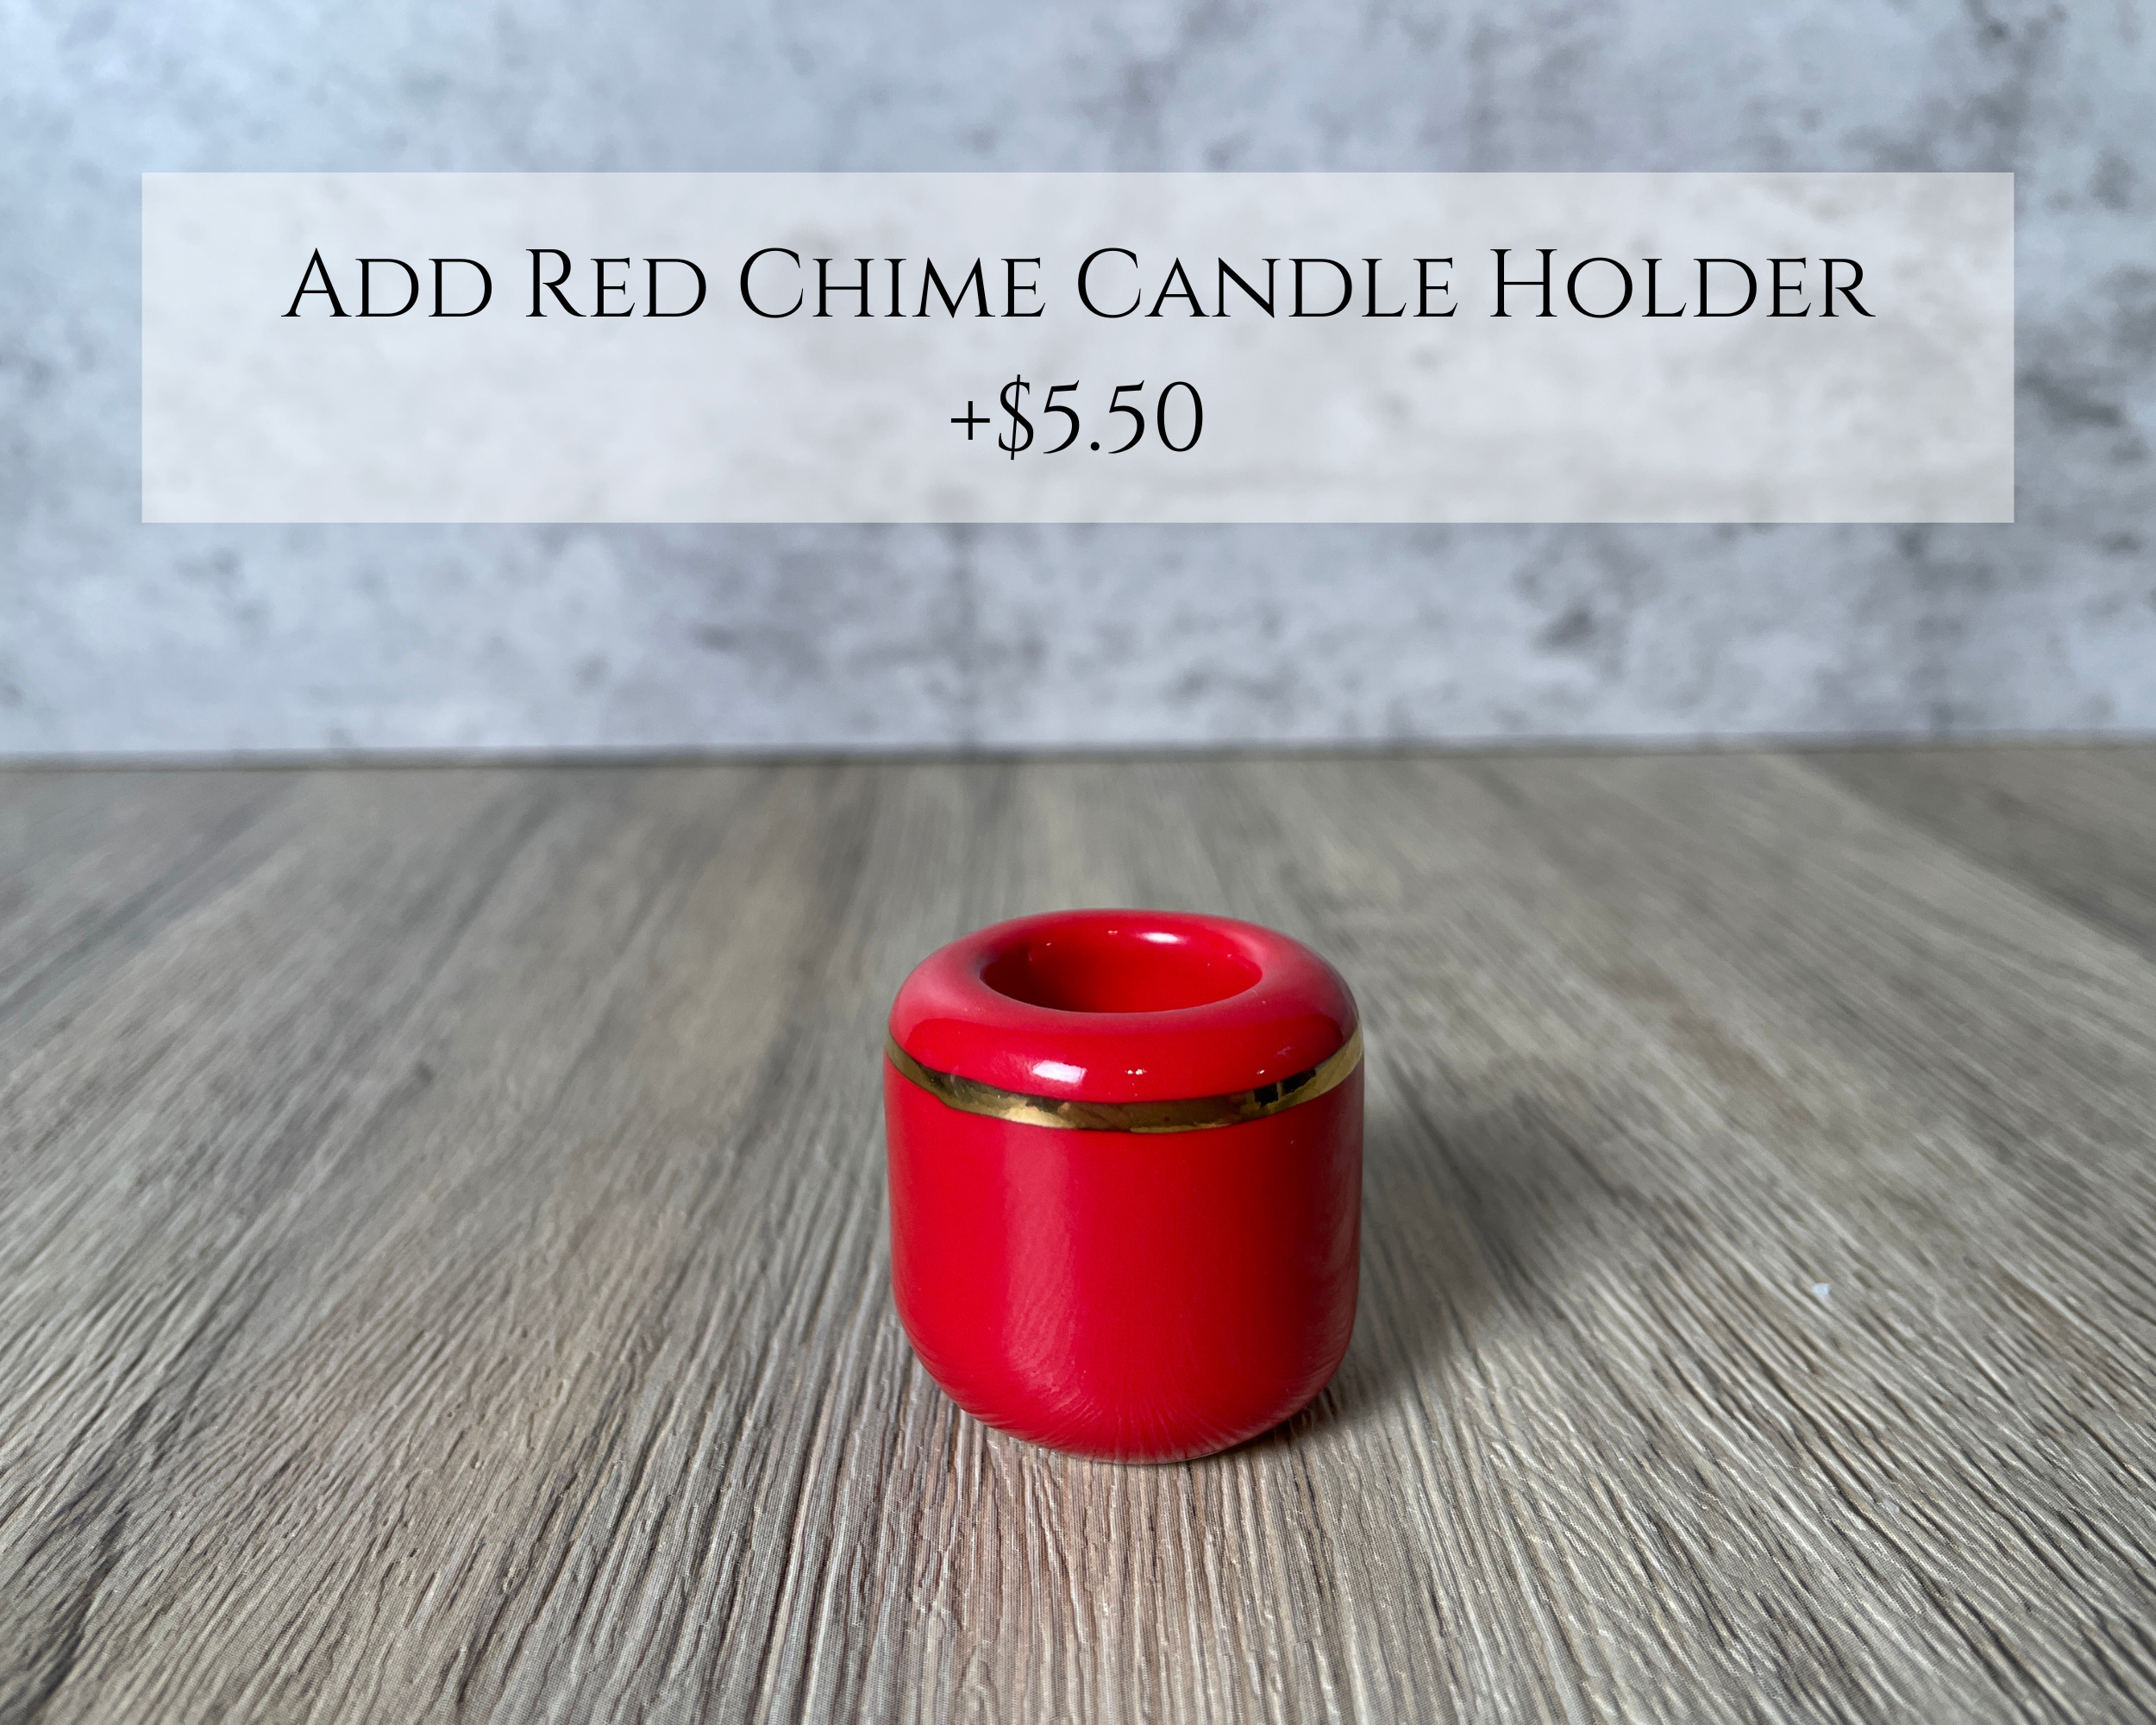 Buy Online Latest and Unique Red Chime Candles - Passion, Sex, Attraction, Power, Lust | Shop Best Spiritual Items - The Mystical Ritual